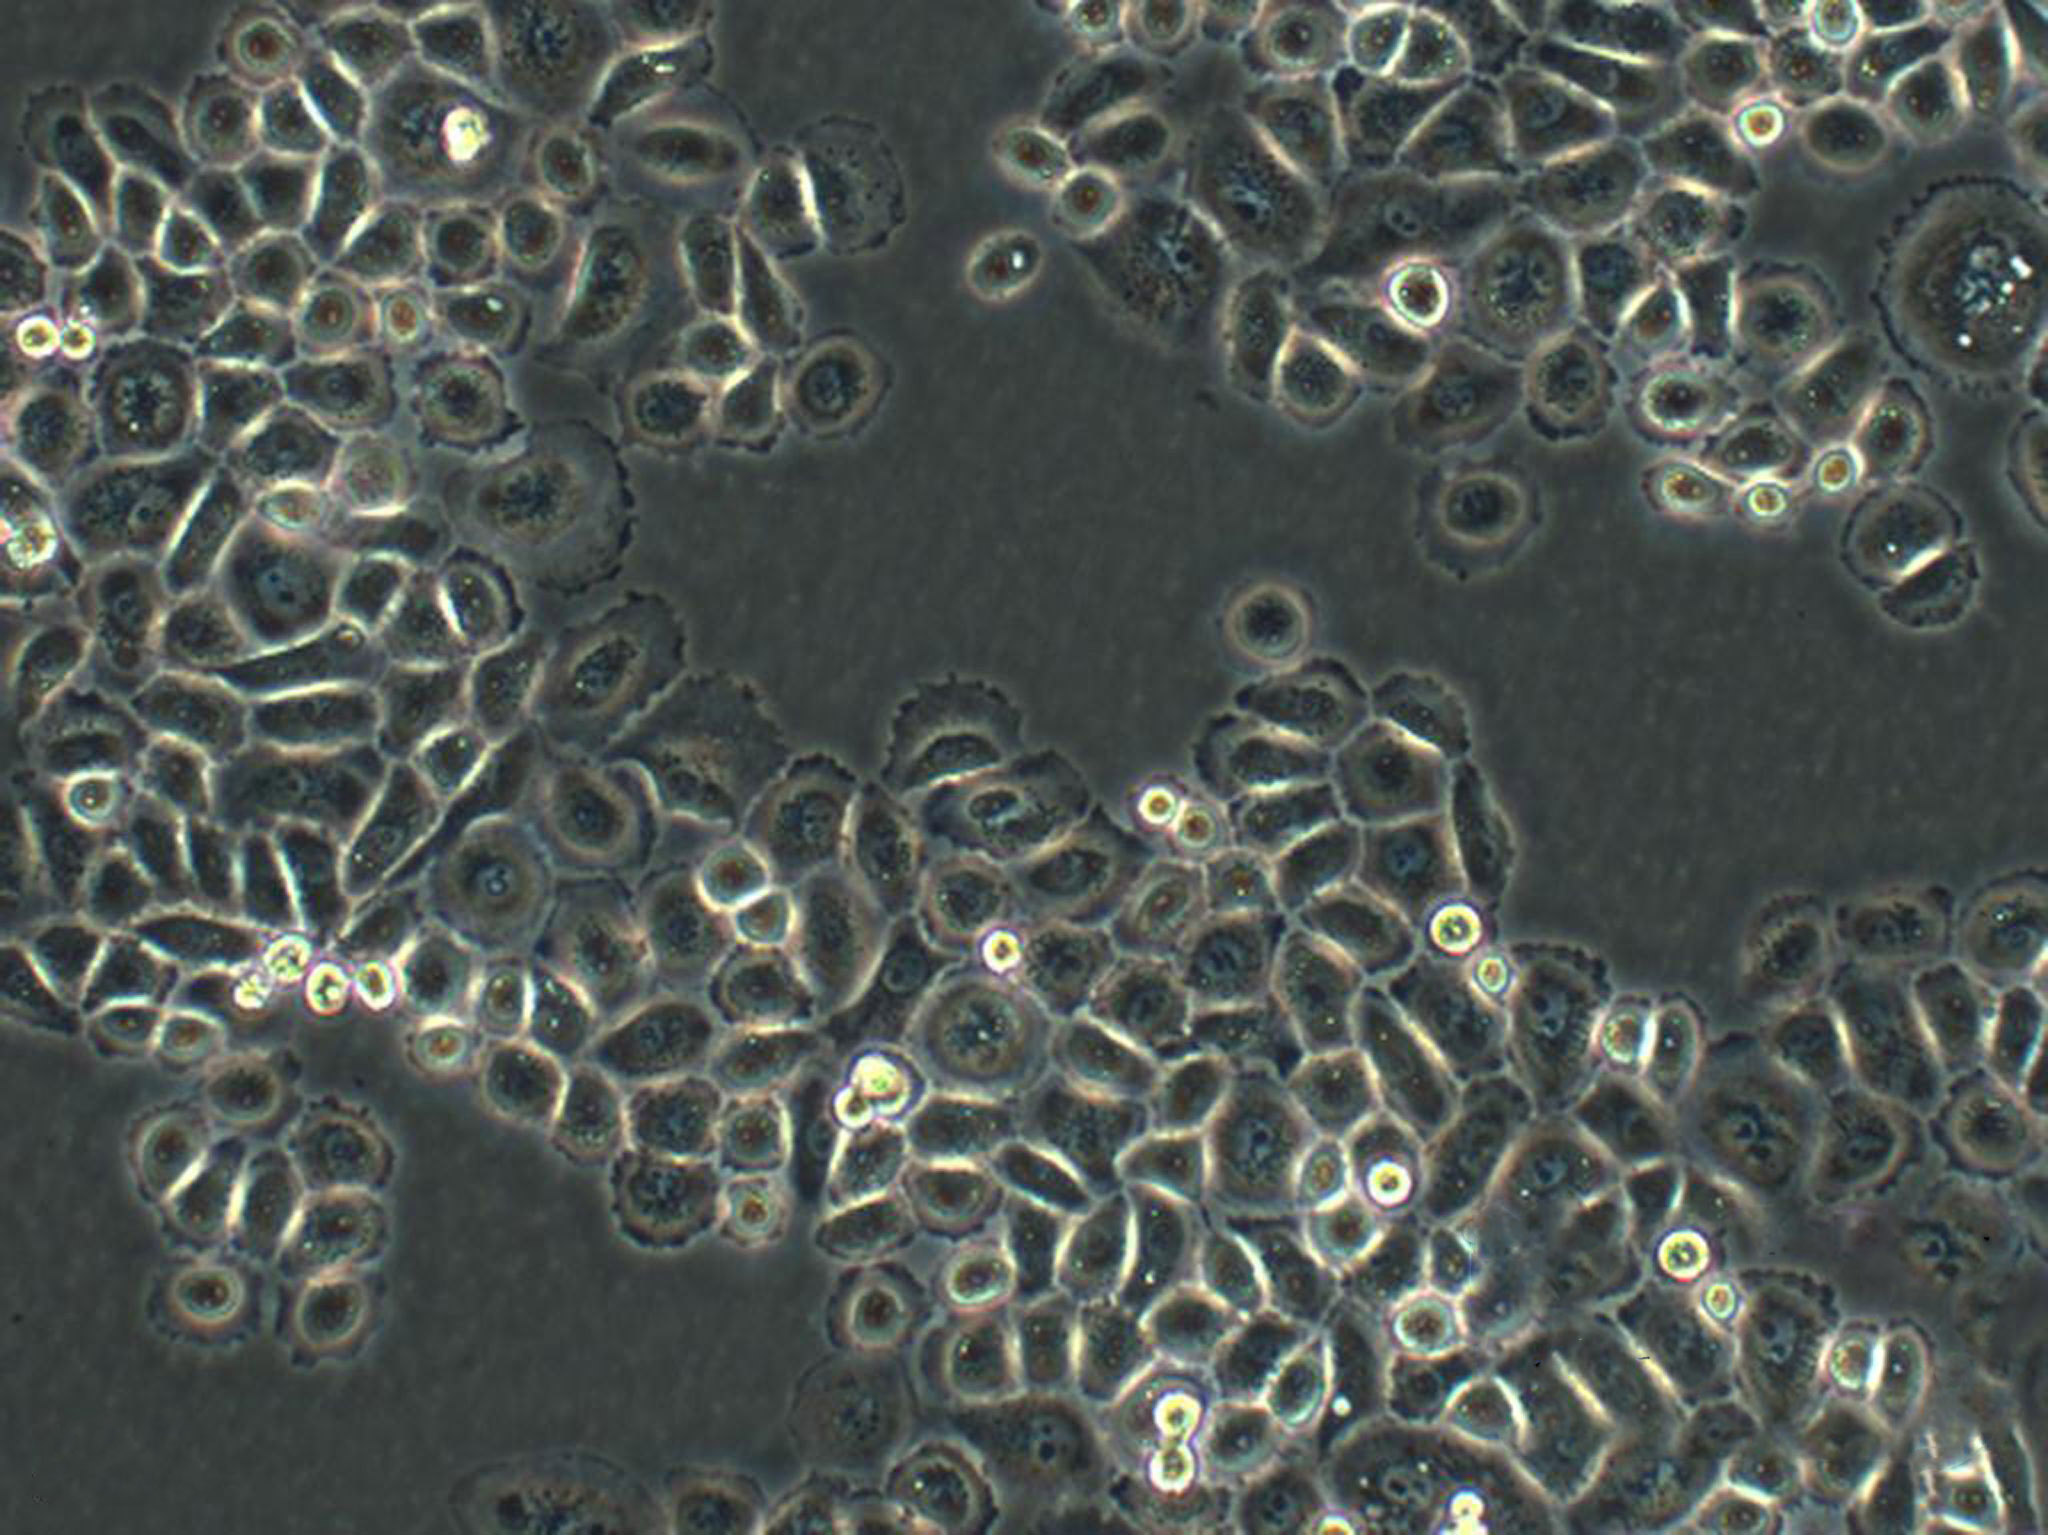 CAL-78 epithelioid cells人软骨肉瘤细胞系,CAL-78 epithelioid cells